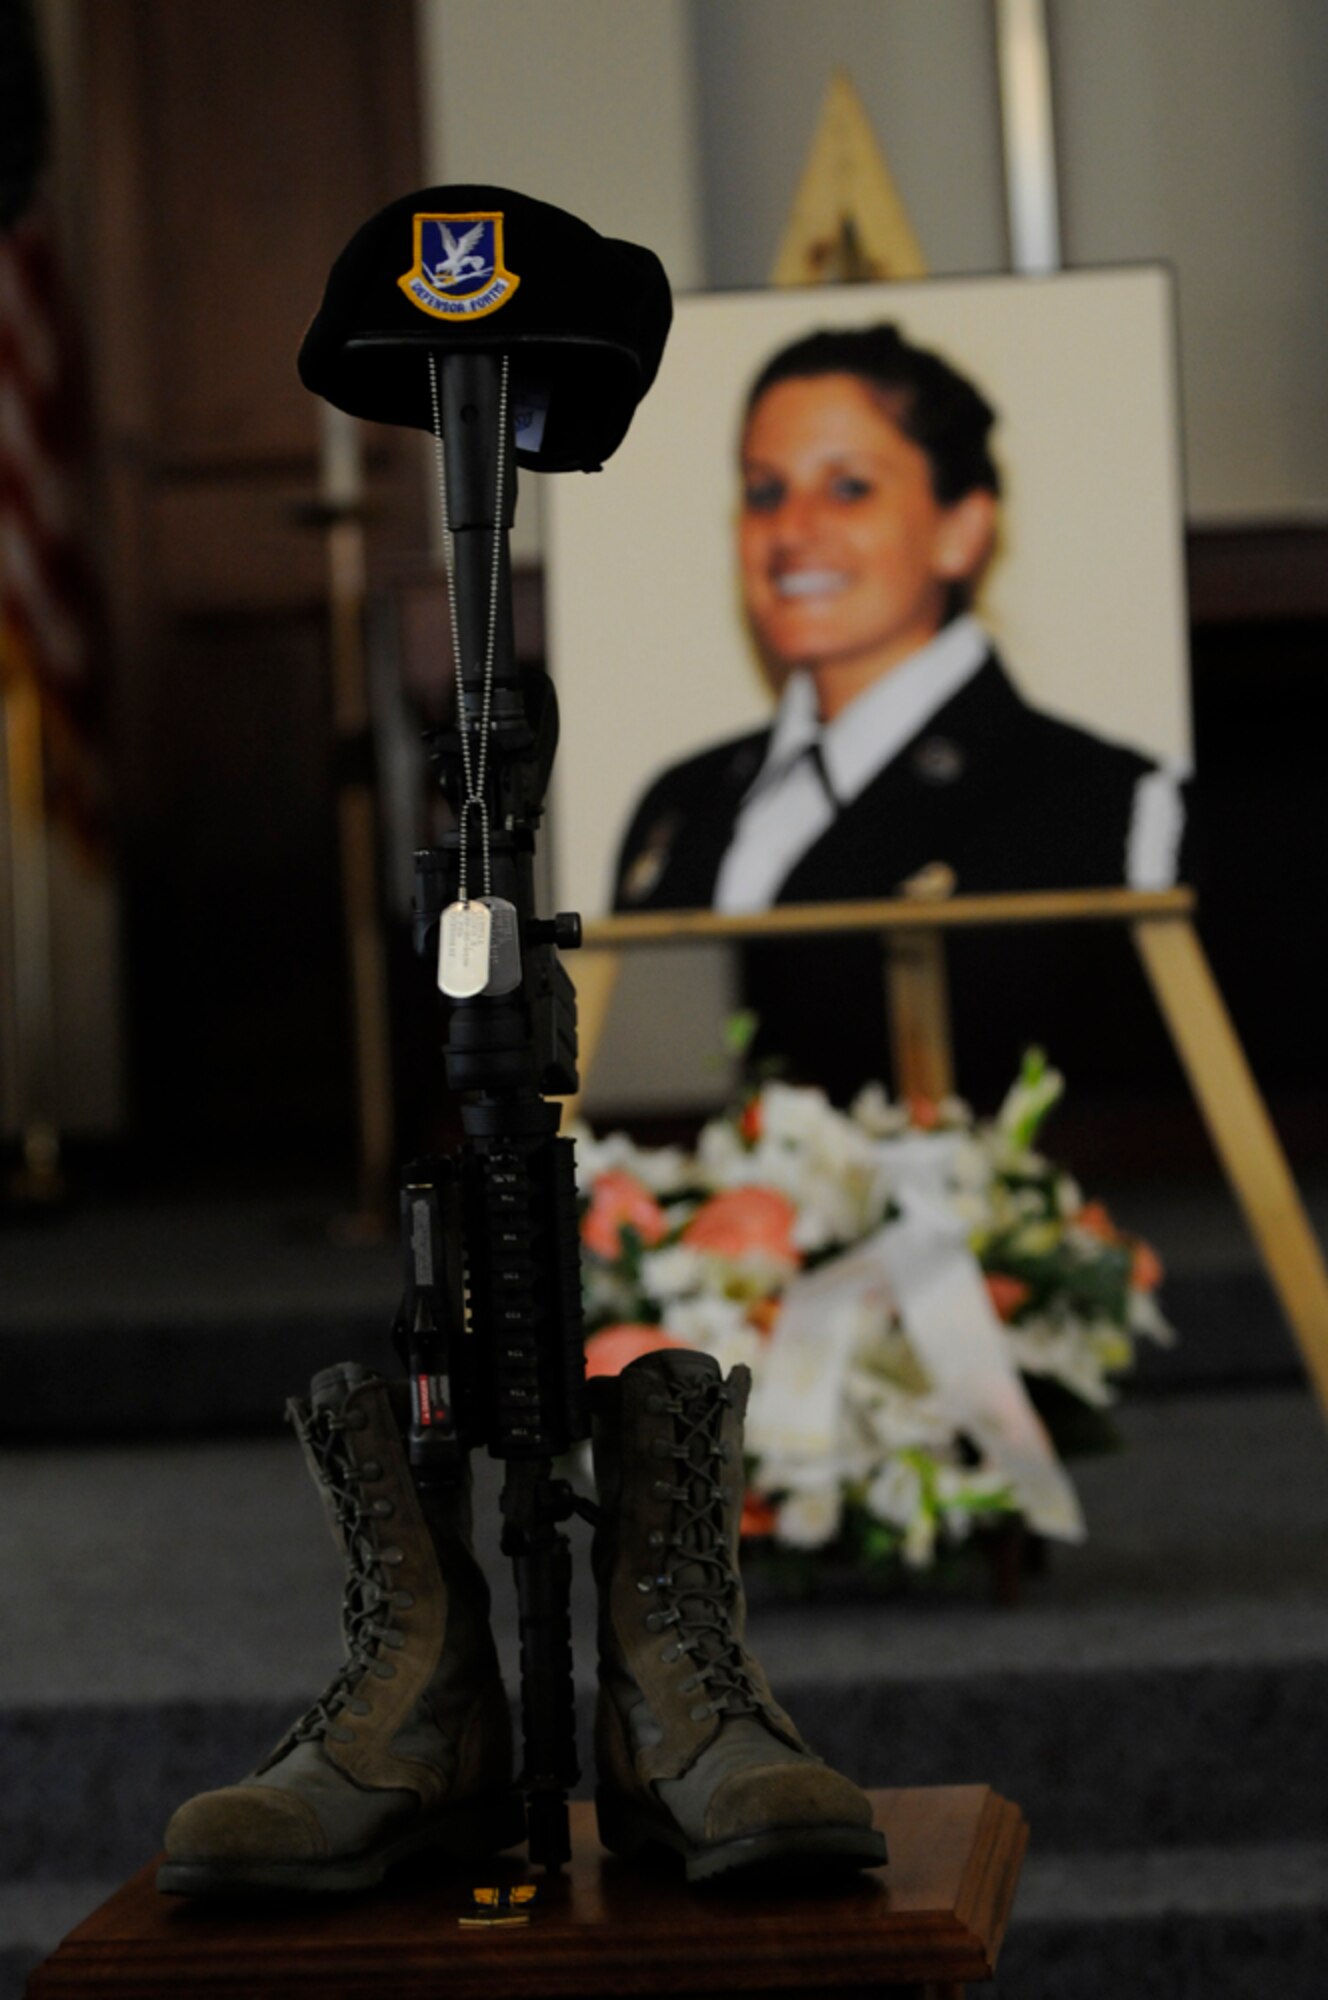 Members of the 65th Security Forces Squadron placed a memorial display in honor of Senior Airman Amber Finnell, 65th SFS, in the front of the base chapel sanctuary at Lajes Field July 2. Airman Finnell was from East Tawas, Mich. and entered the Air Force in Feb. 2004.  She had been previously stationed at Minot AFB, N.D. and Sather AB, Baghdad, Iraq; she passed away on June 30, 2009.  (U.S. Air Force photo by Tech. Sgt. Darrell I. Dean)